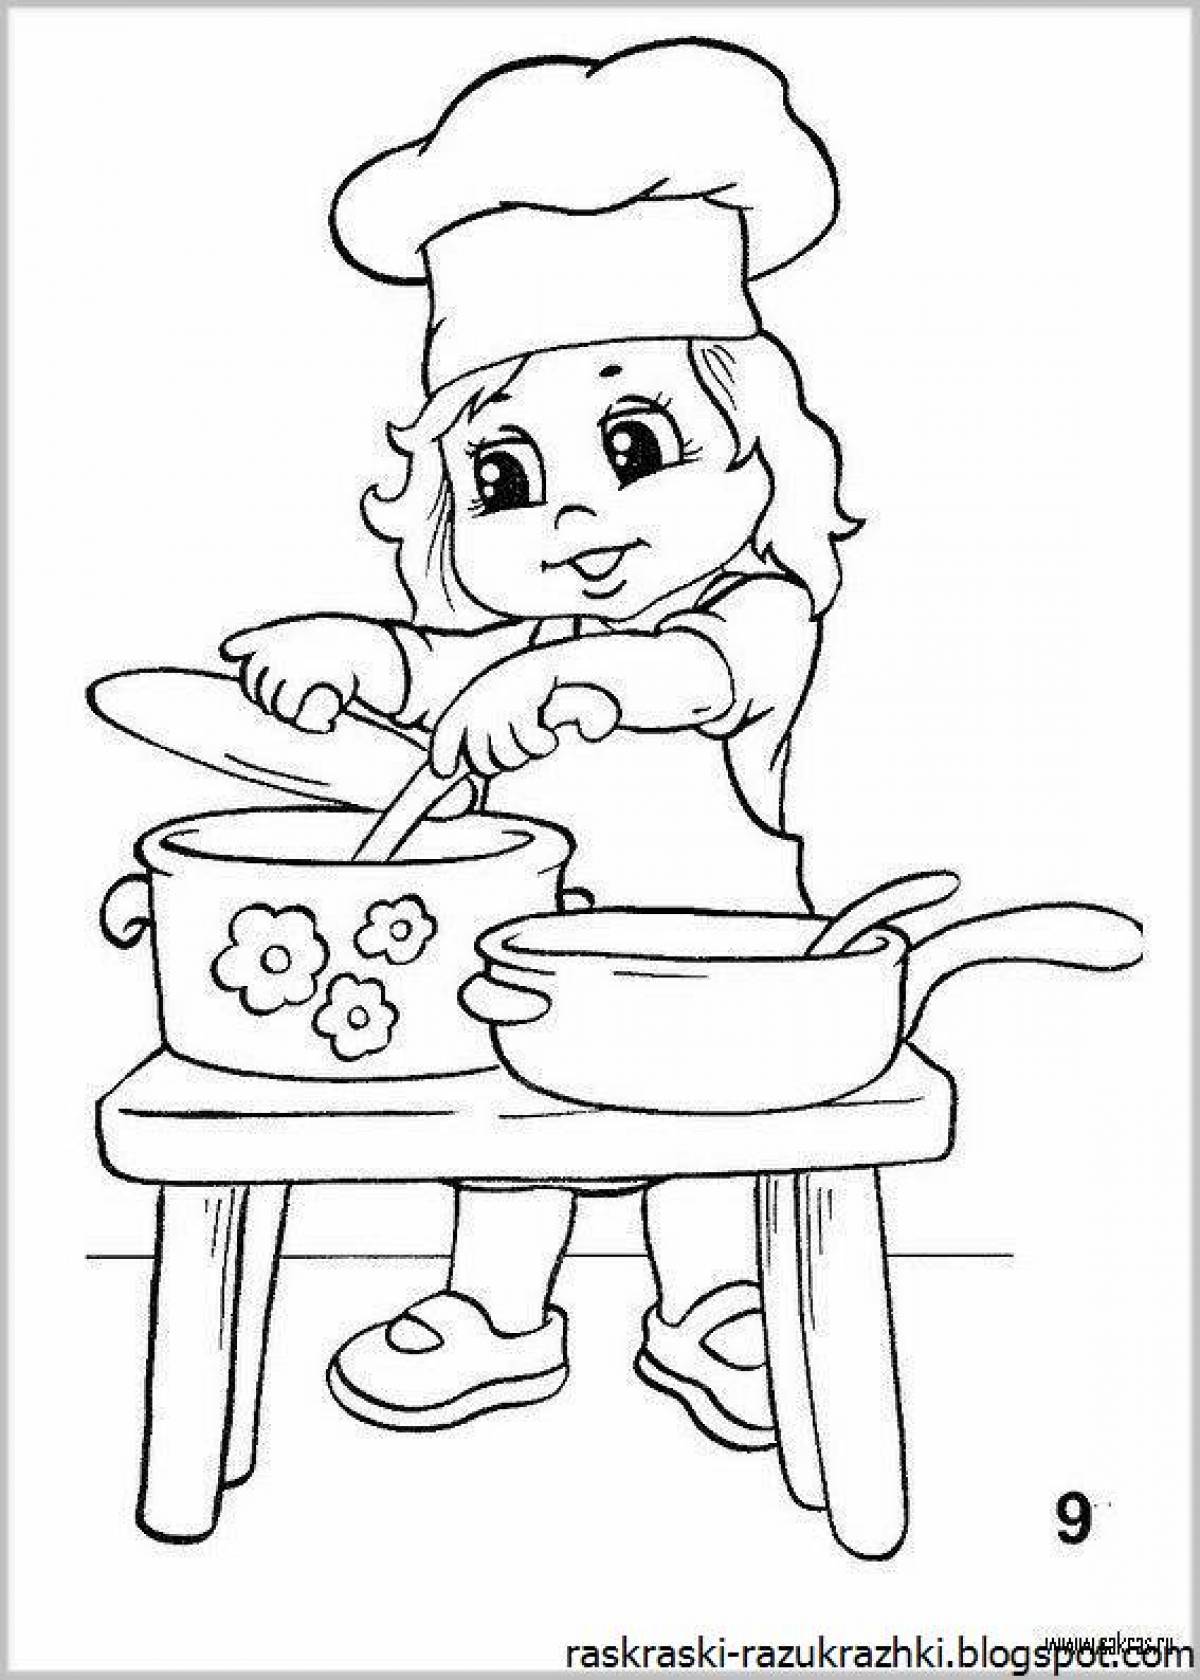 Playful cook coloring page for kids